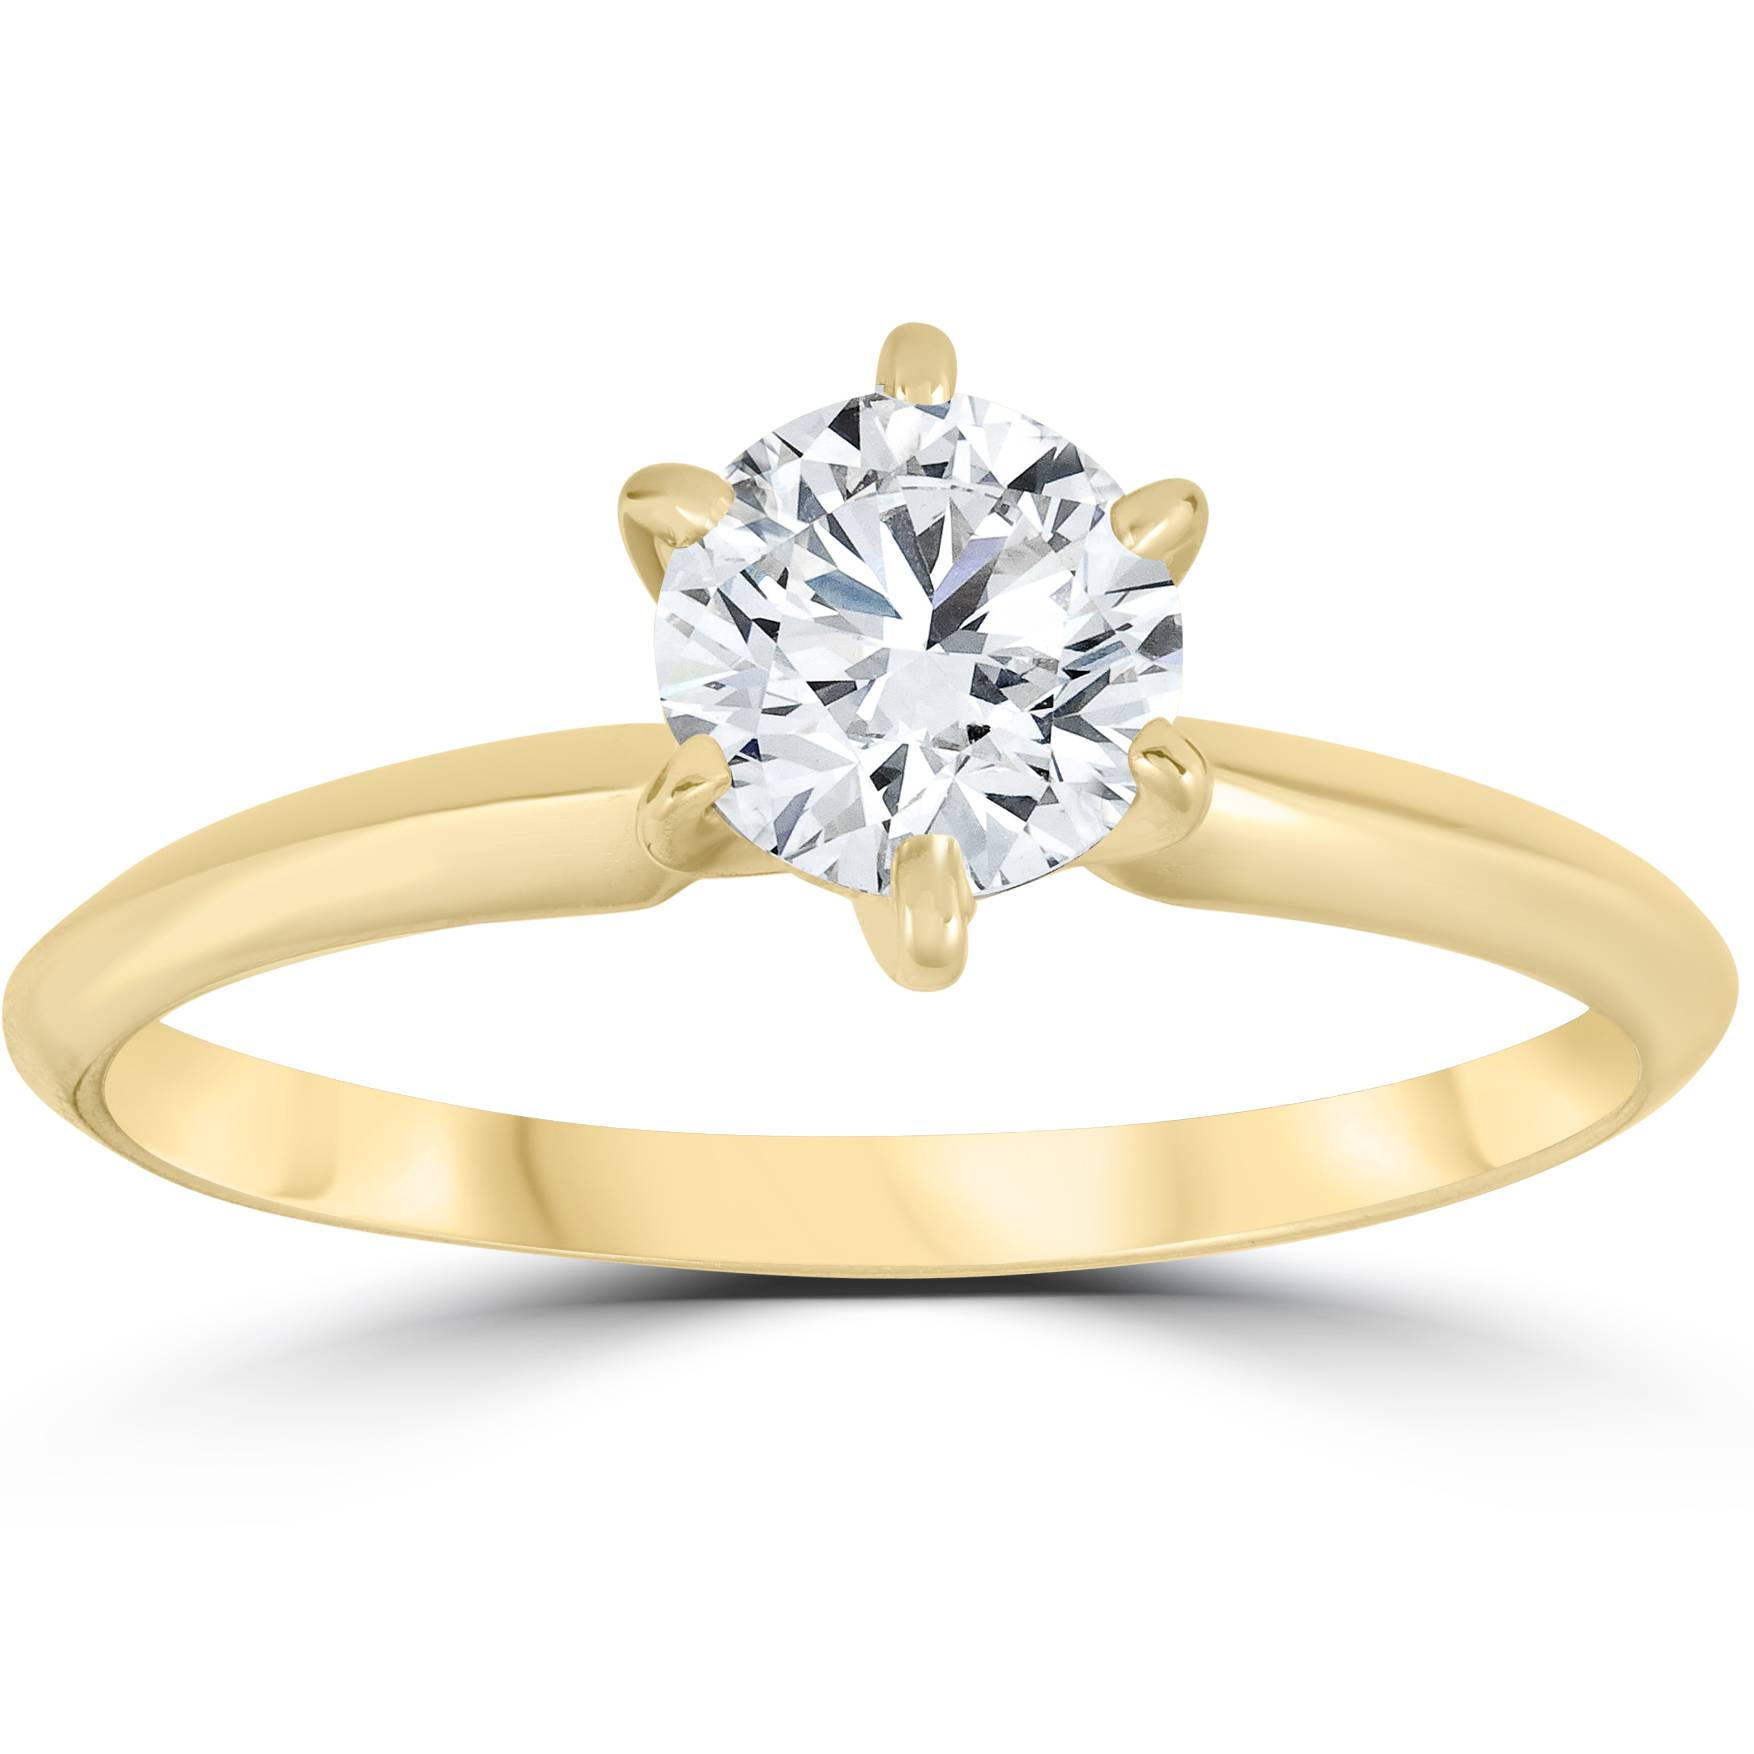 Round Solitaire Diamond Engagement Rings
 14k Yellow Gold 3 4ct Round Solitaire Diamond Engagement